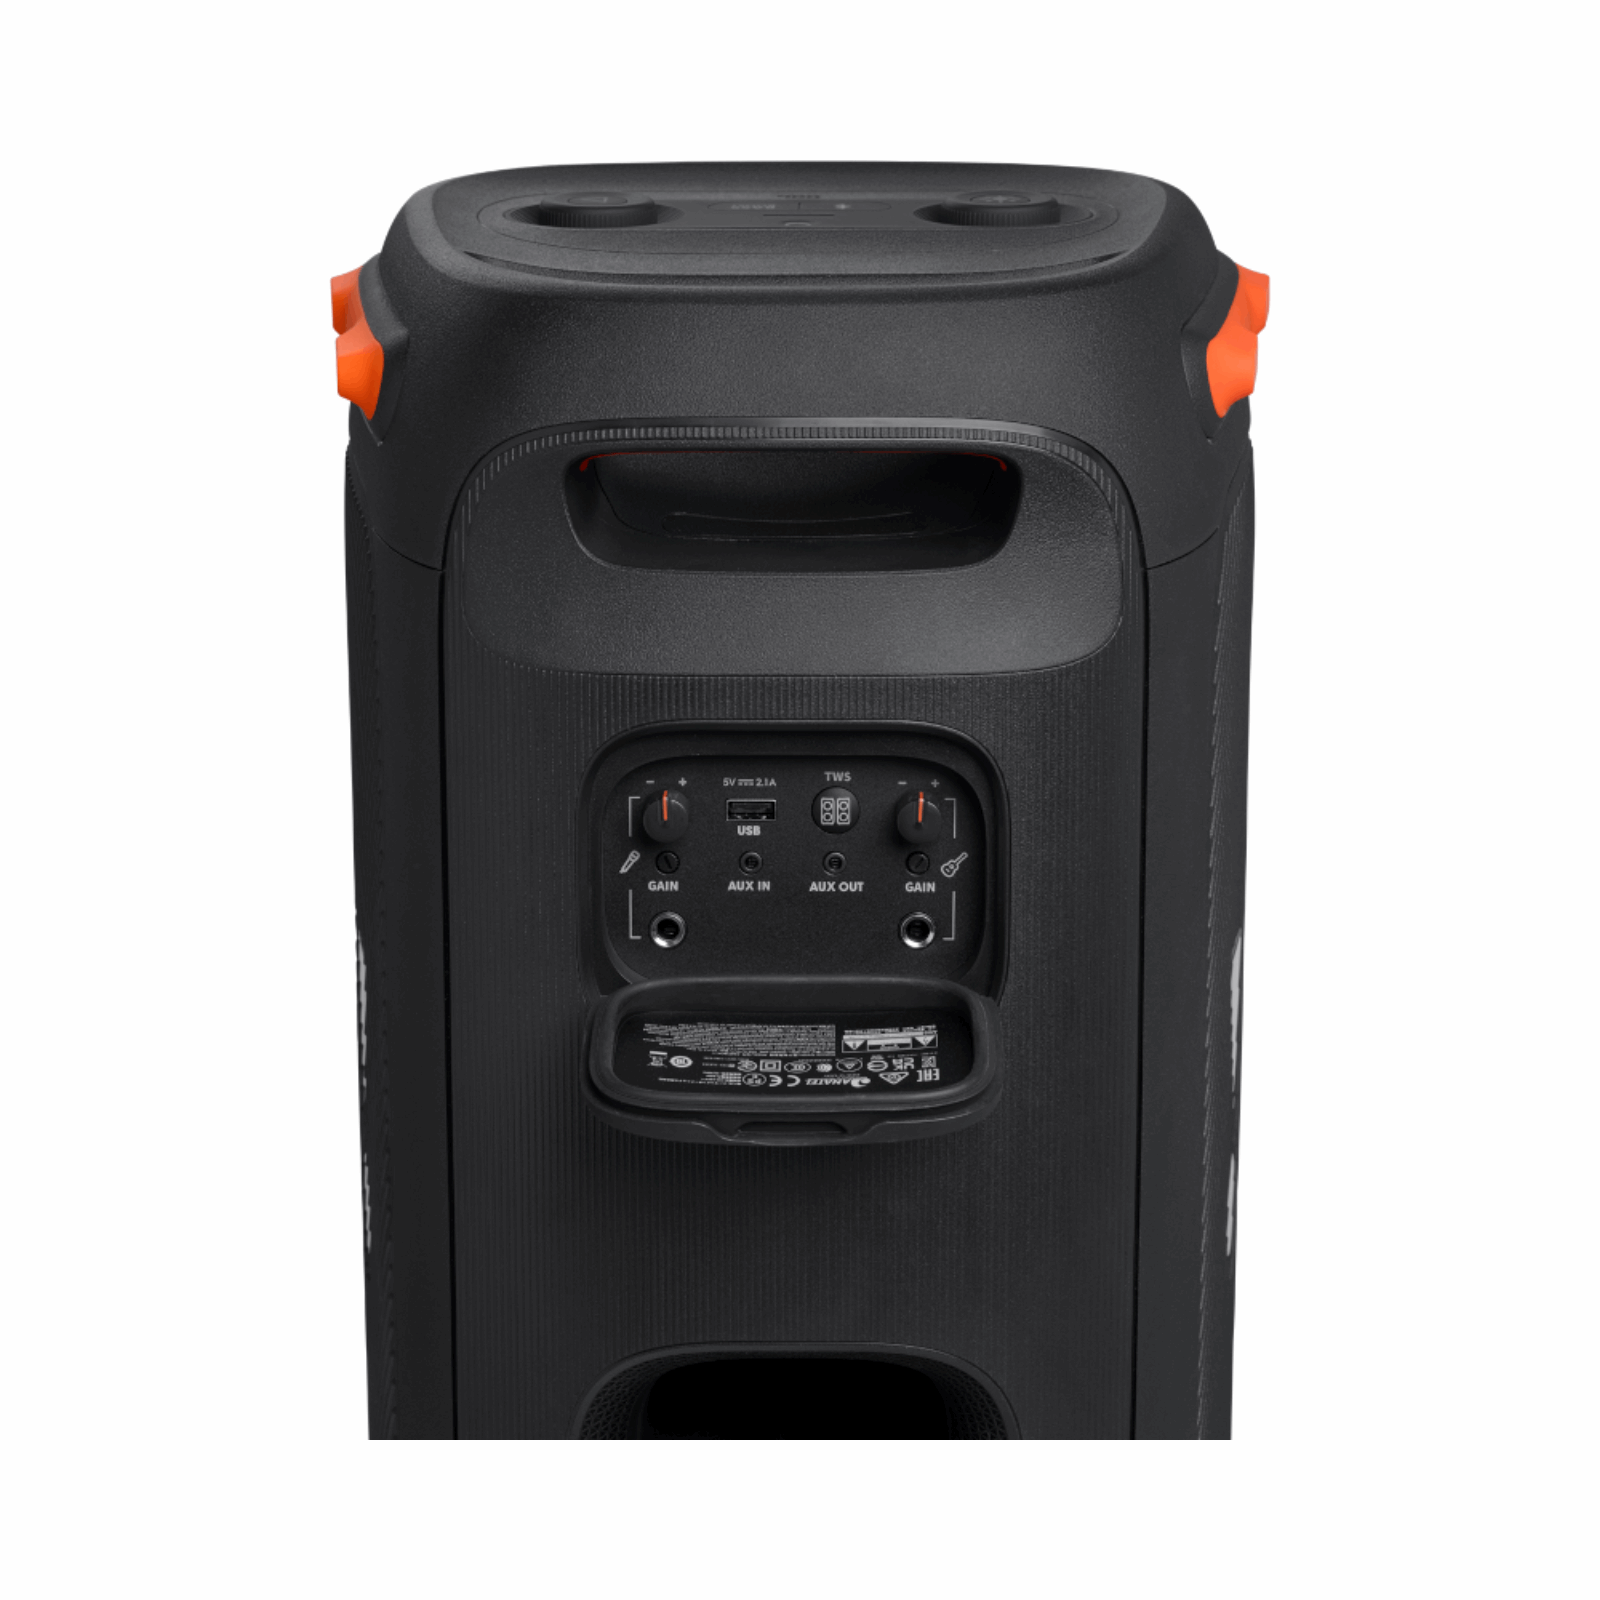 JBL PARTYBOX 110 Portable Party Speaker with 160W Powerful Sound, Built-in Lights and Splashproof Design